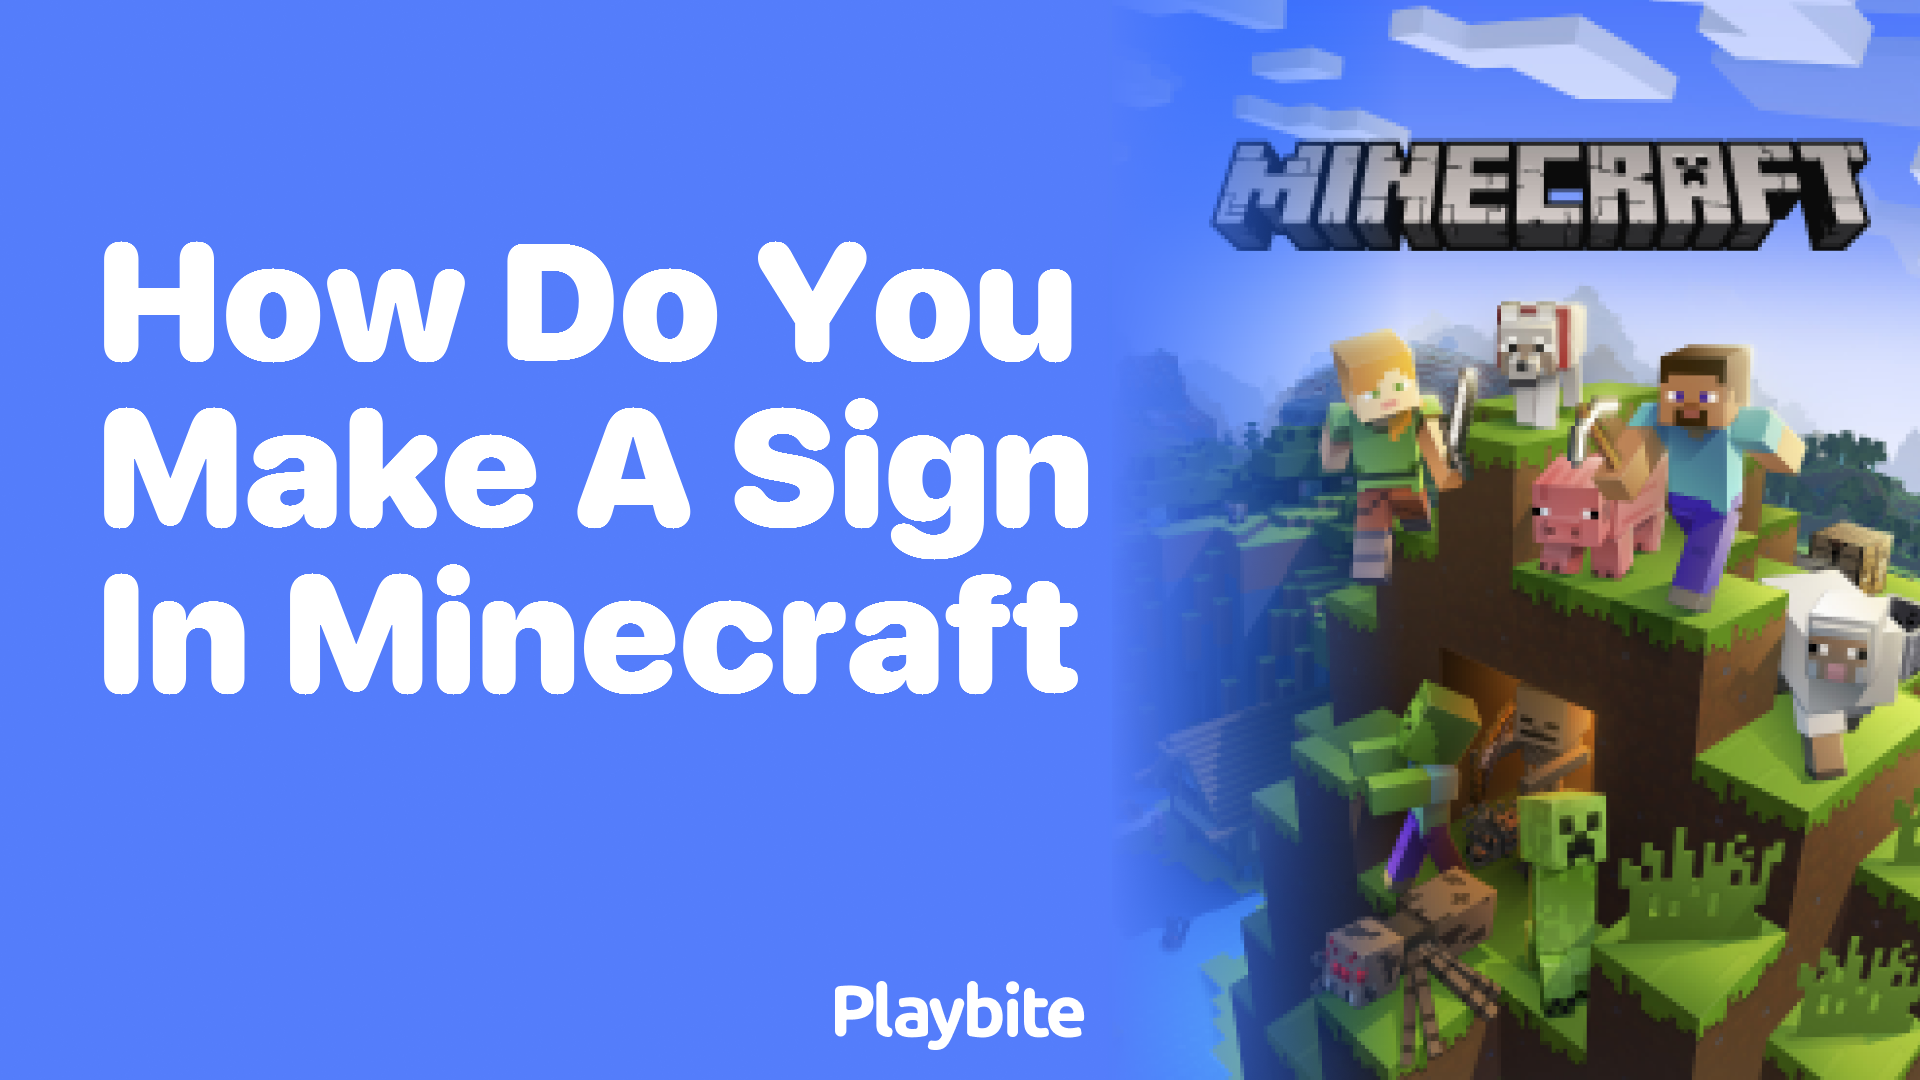 How do you make a sign in Minecraft?